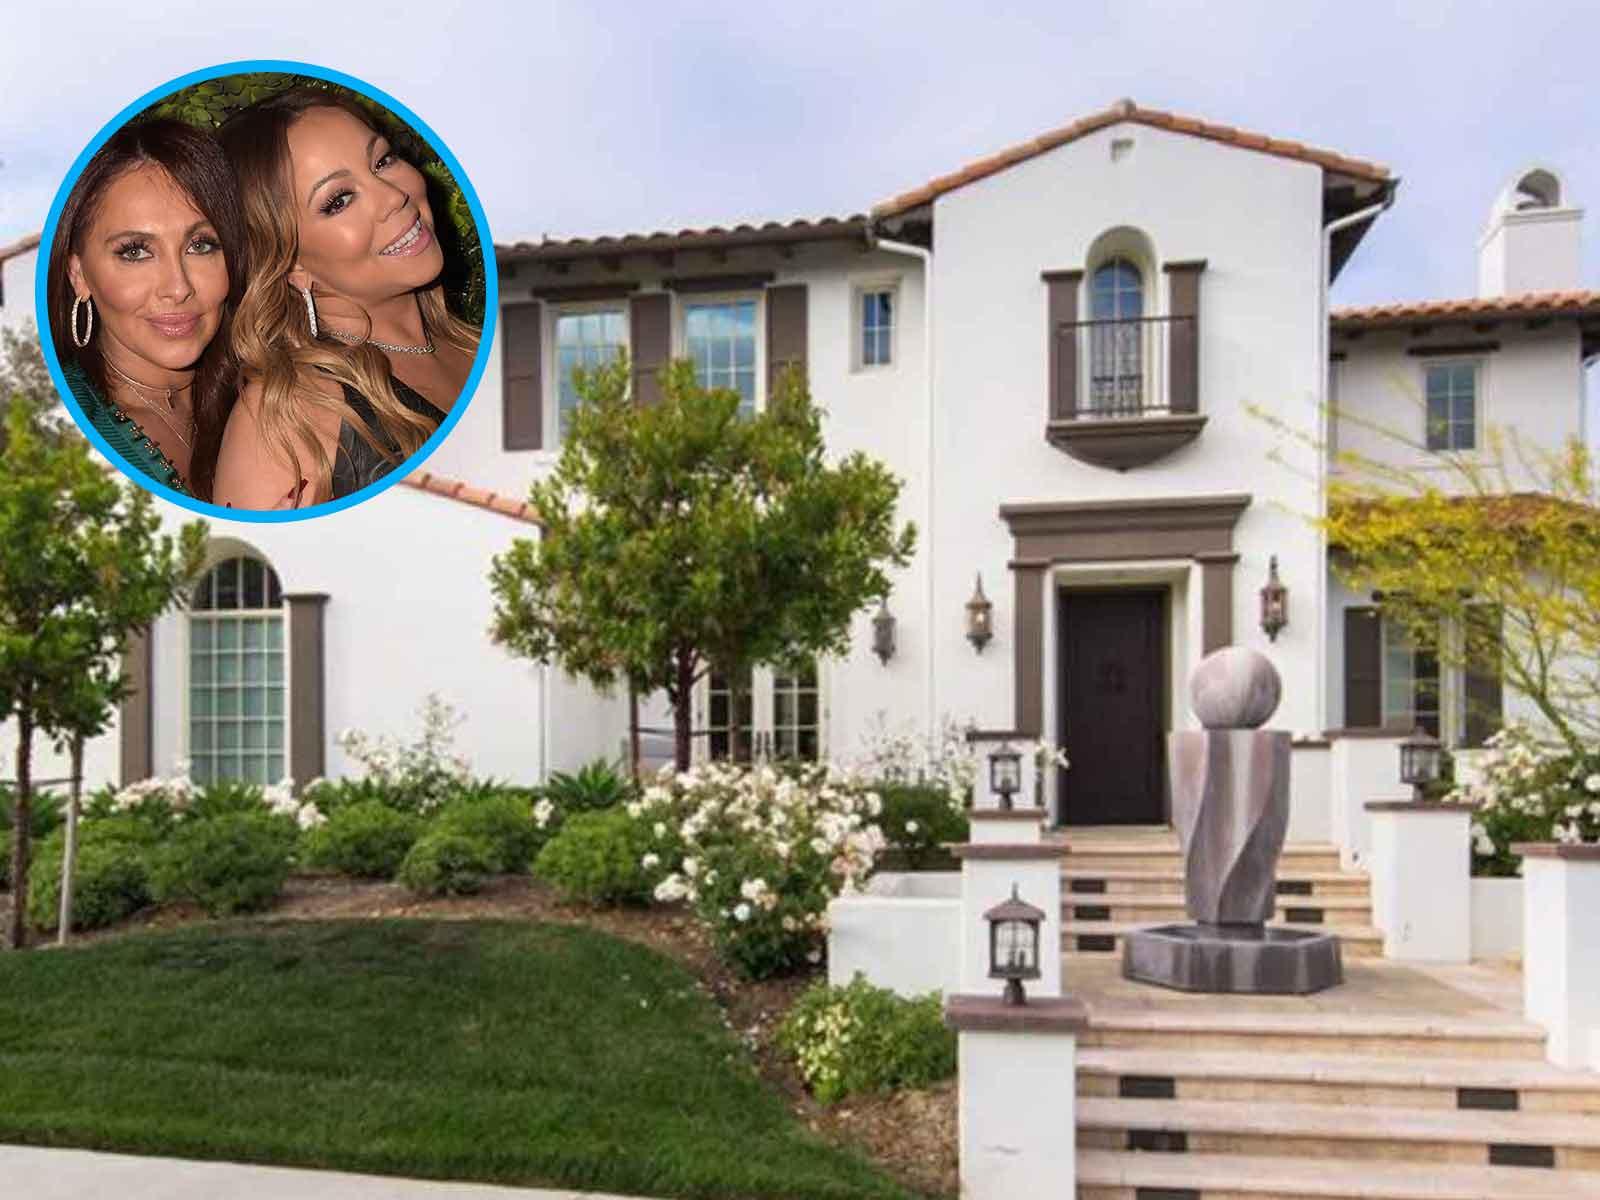 Mariah Carey’s Ex-Manager Forced to Sell Home After She Claims Singer Refused to Pay Millions Owed